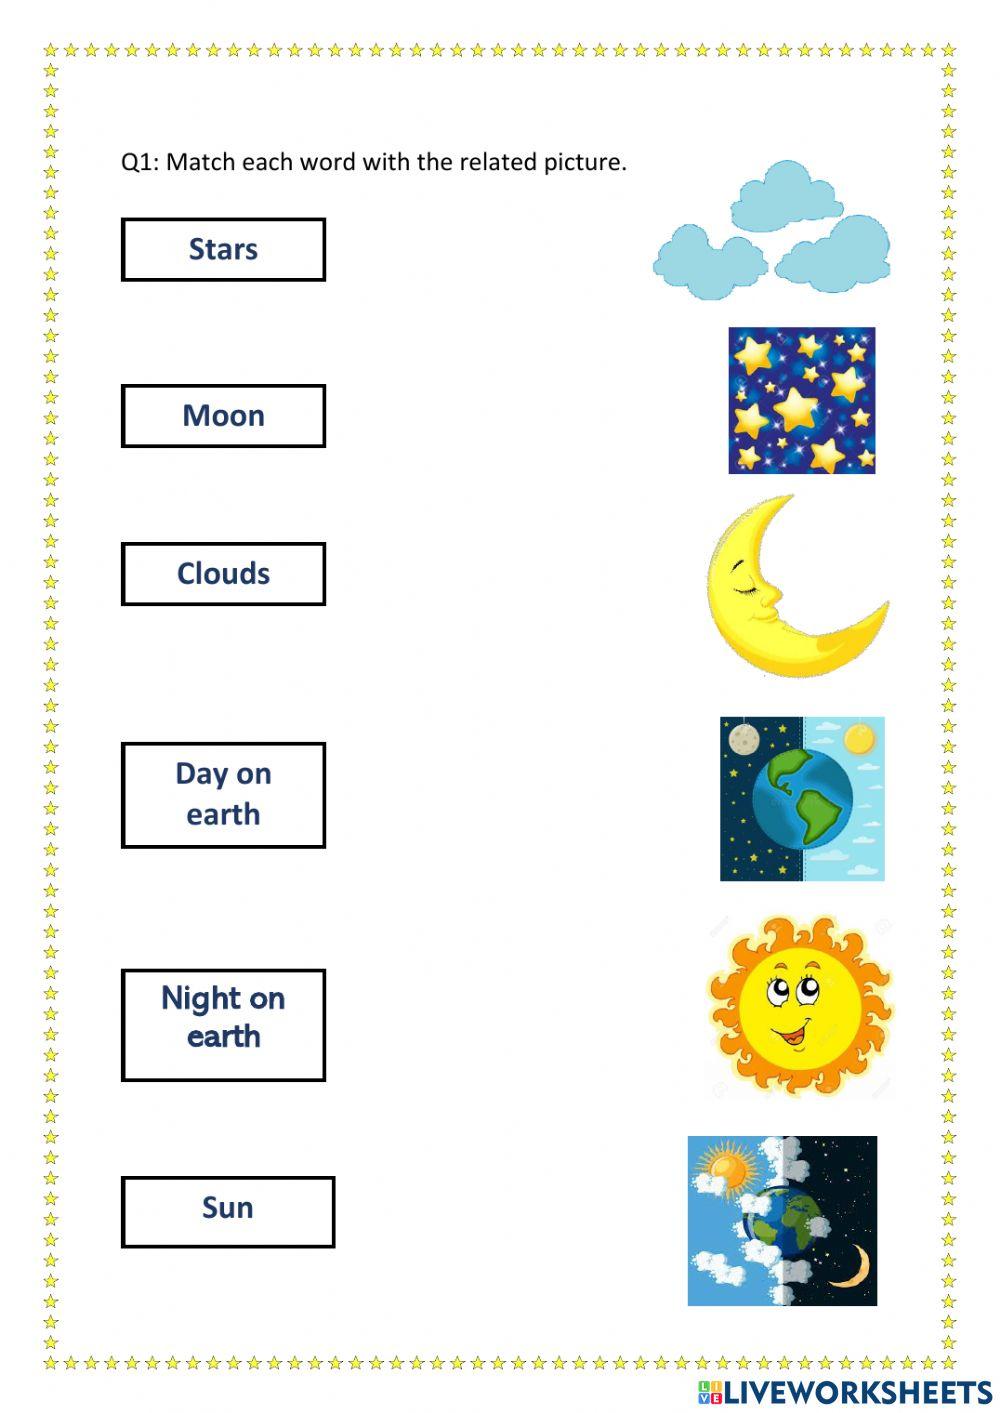 Day and Night worksheet